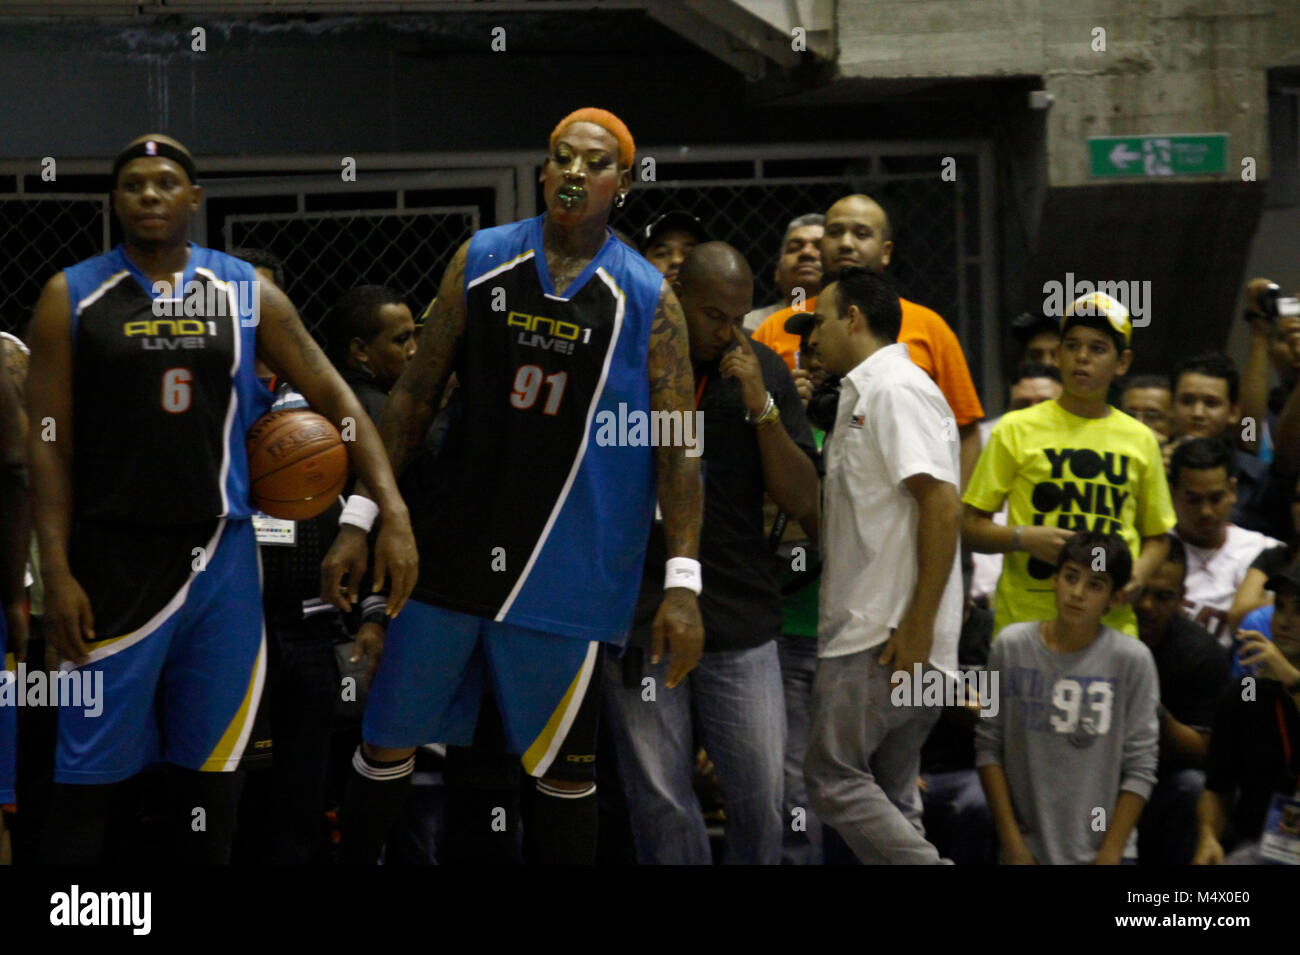 Valencia, Carabobo, Venezuela. 3rd Aug, 2012. August 03, 2014. ÃŠ Dennis Keith Rodman (born May 13, 1961 in Trenton, New Jersey, United States) is a former professional basketball player in the NBA, best known for his defensive and rebounding skills. For seven straight seasons he led the NBA in rebounding per game, which became a league record, and he was placed on the NBA defensive team of the year also in seven seasons. His fame grew even more due to his irreverent and controversial attitude on and off the courts. He has appeared in several television programs and movies.The photo was ma Stock Photo